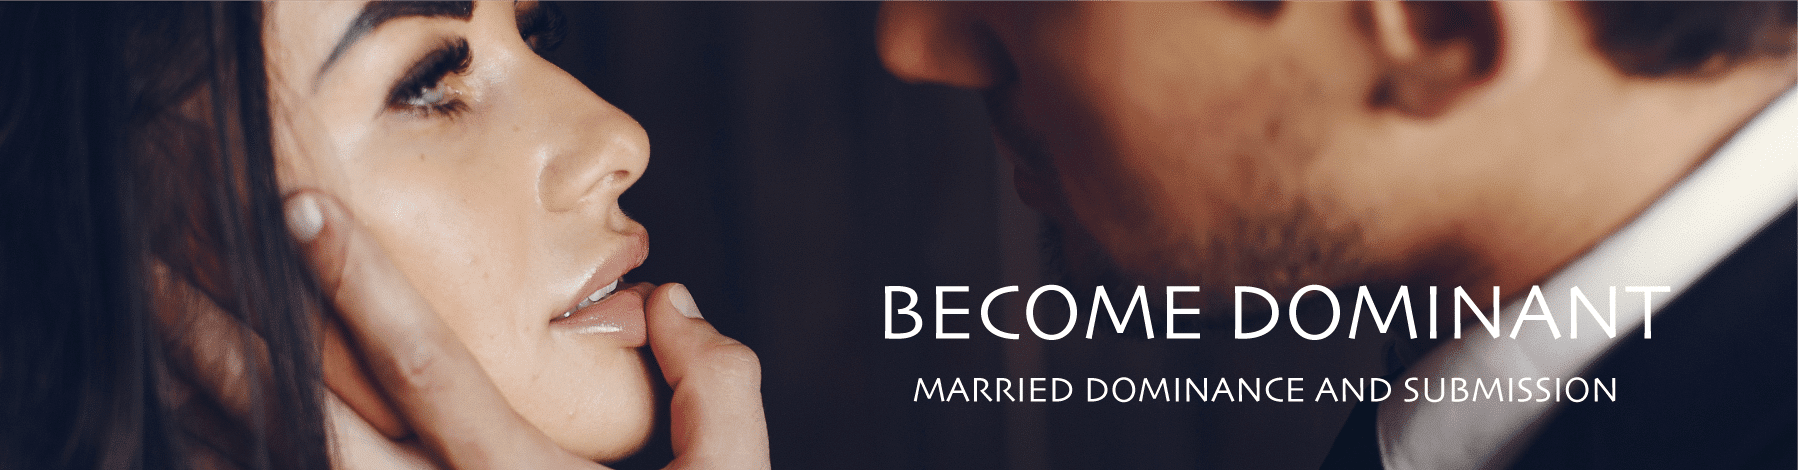 Become Dominant